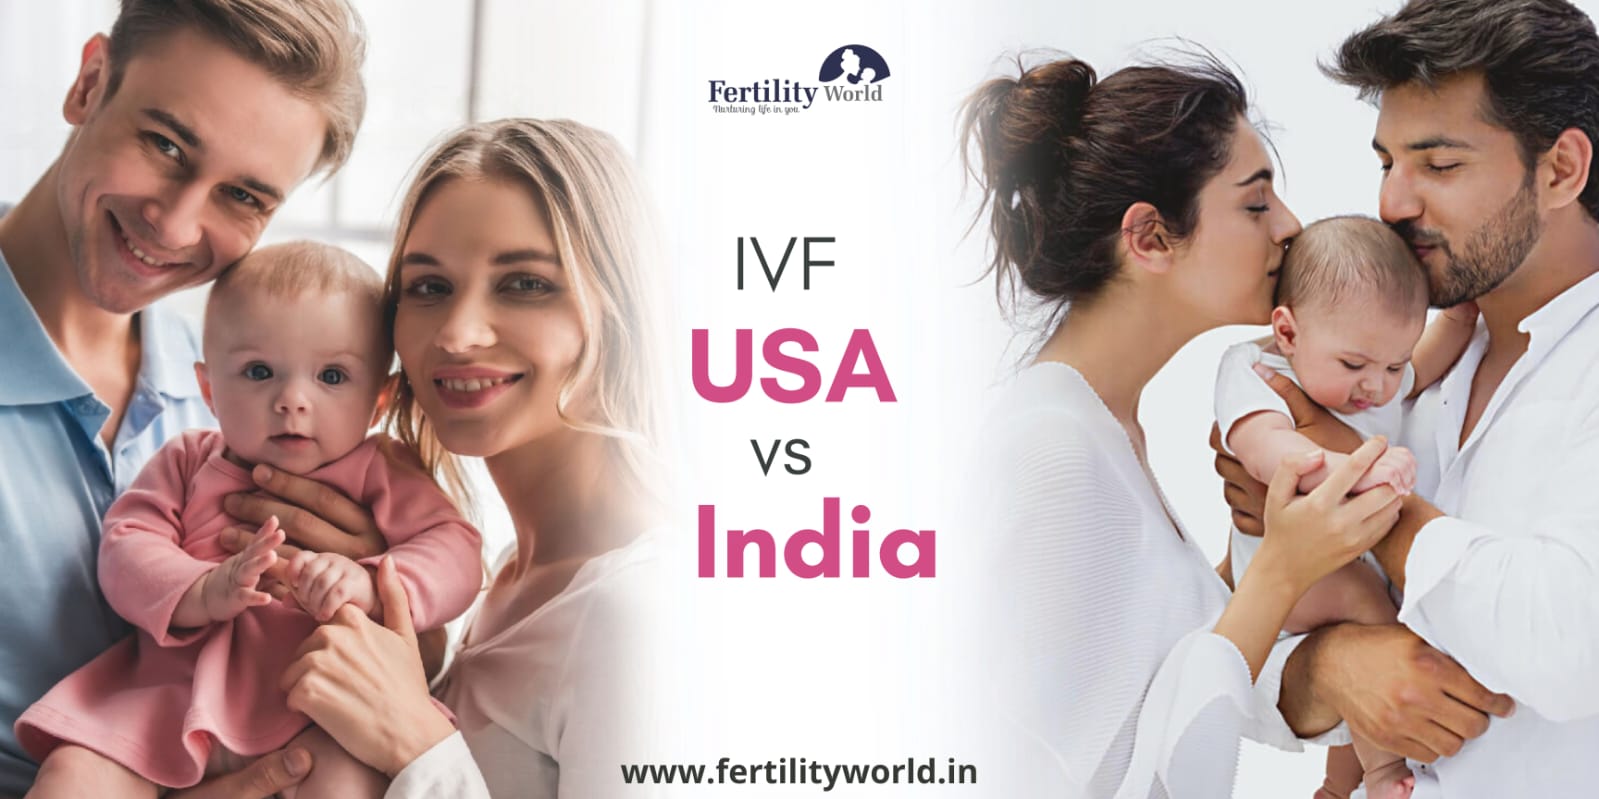 Is IVF better in India or the USA?